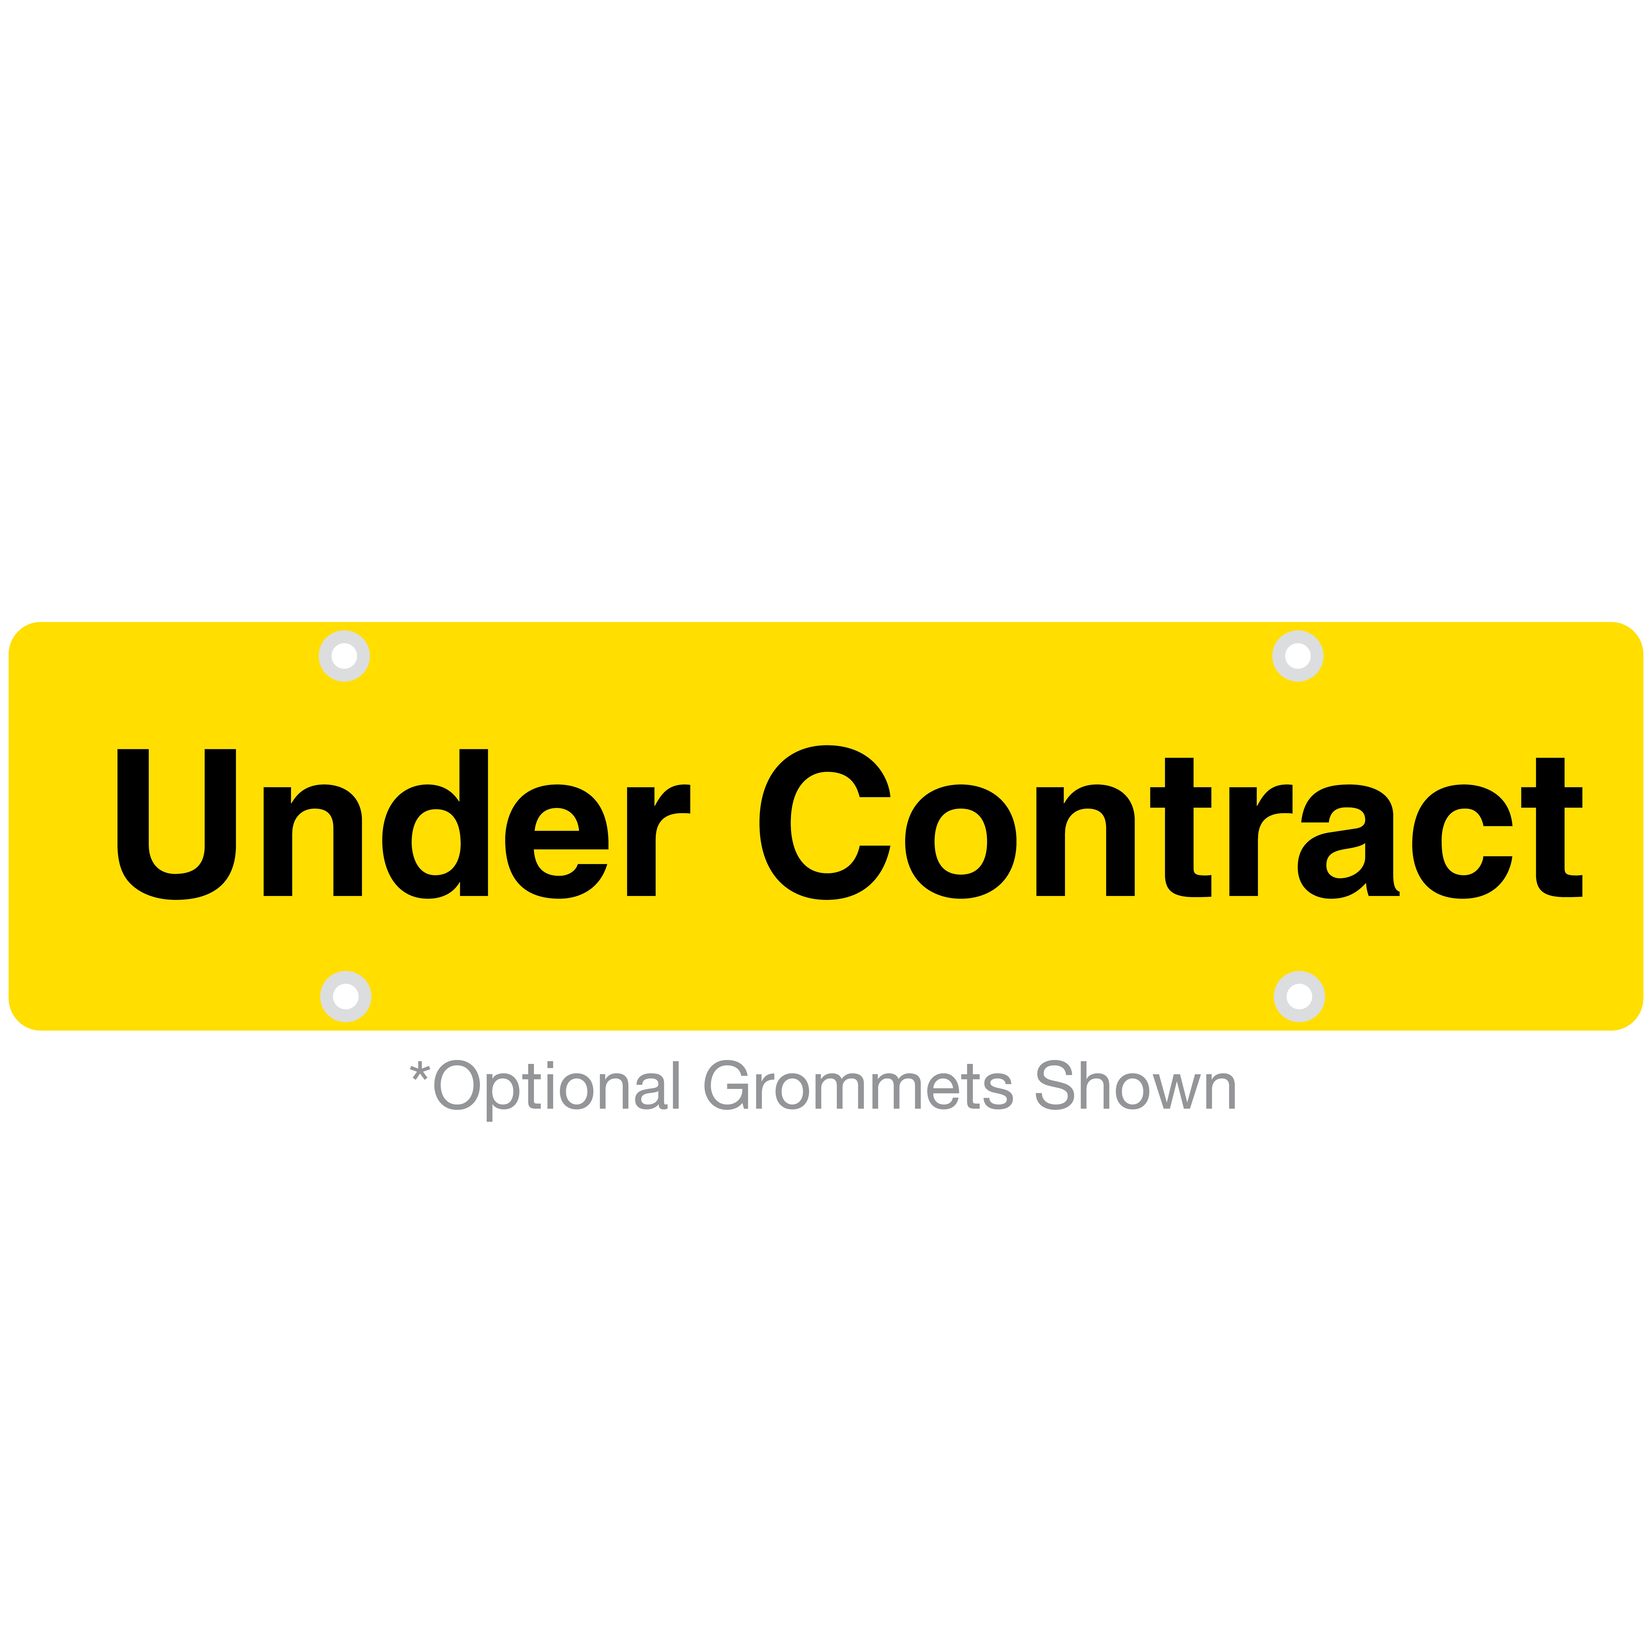 Under Contract RIDER